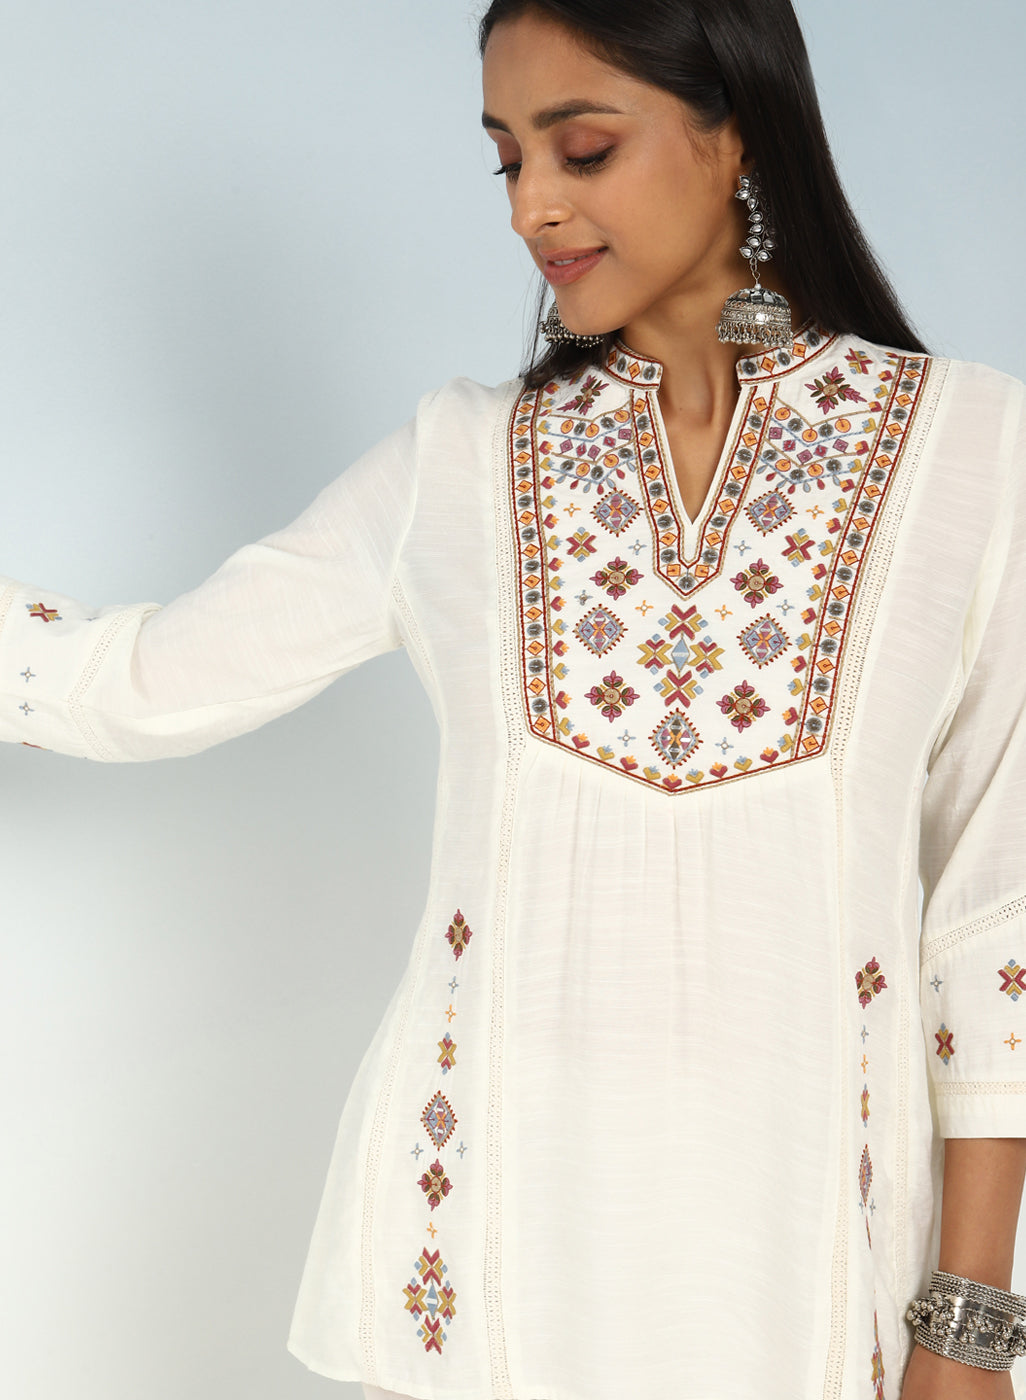 Ivory Tunic with Front Yoke Embroidery Detail